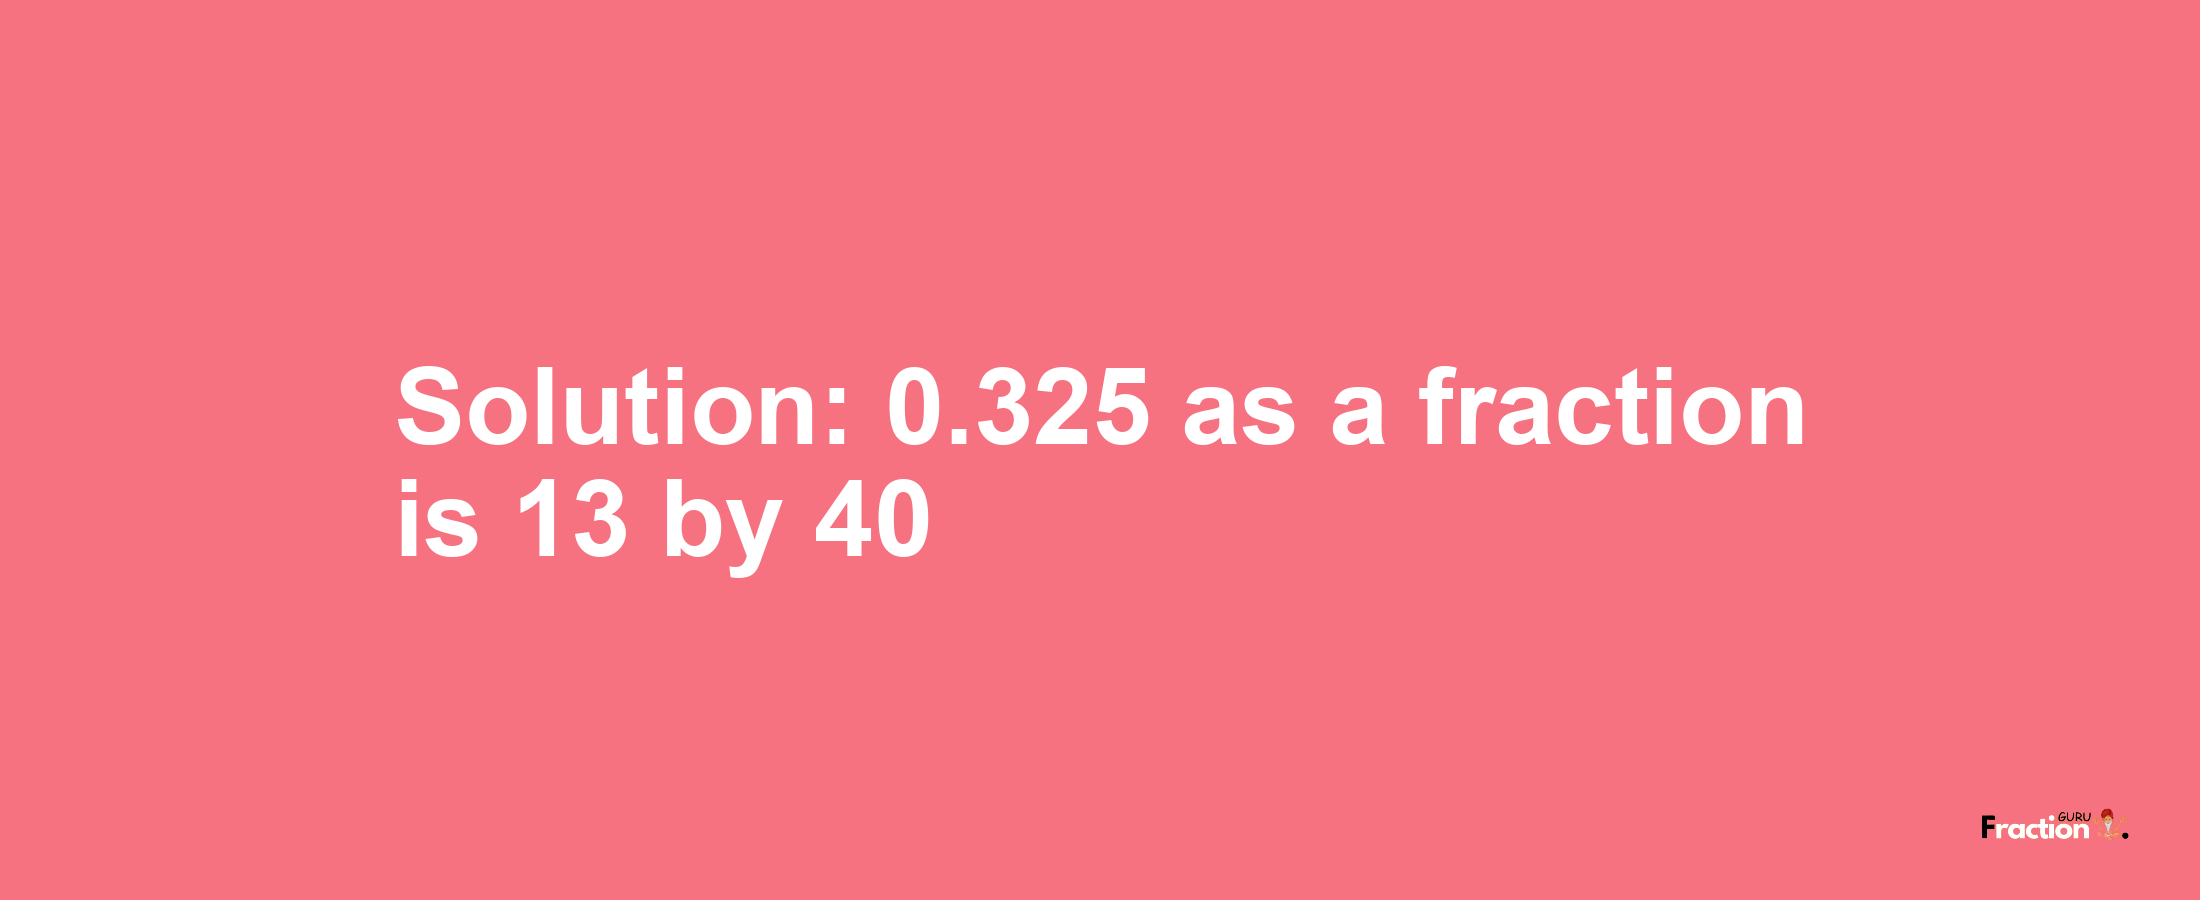 Solution:0.325 as a fraction is 13/40